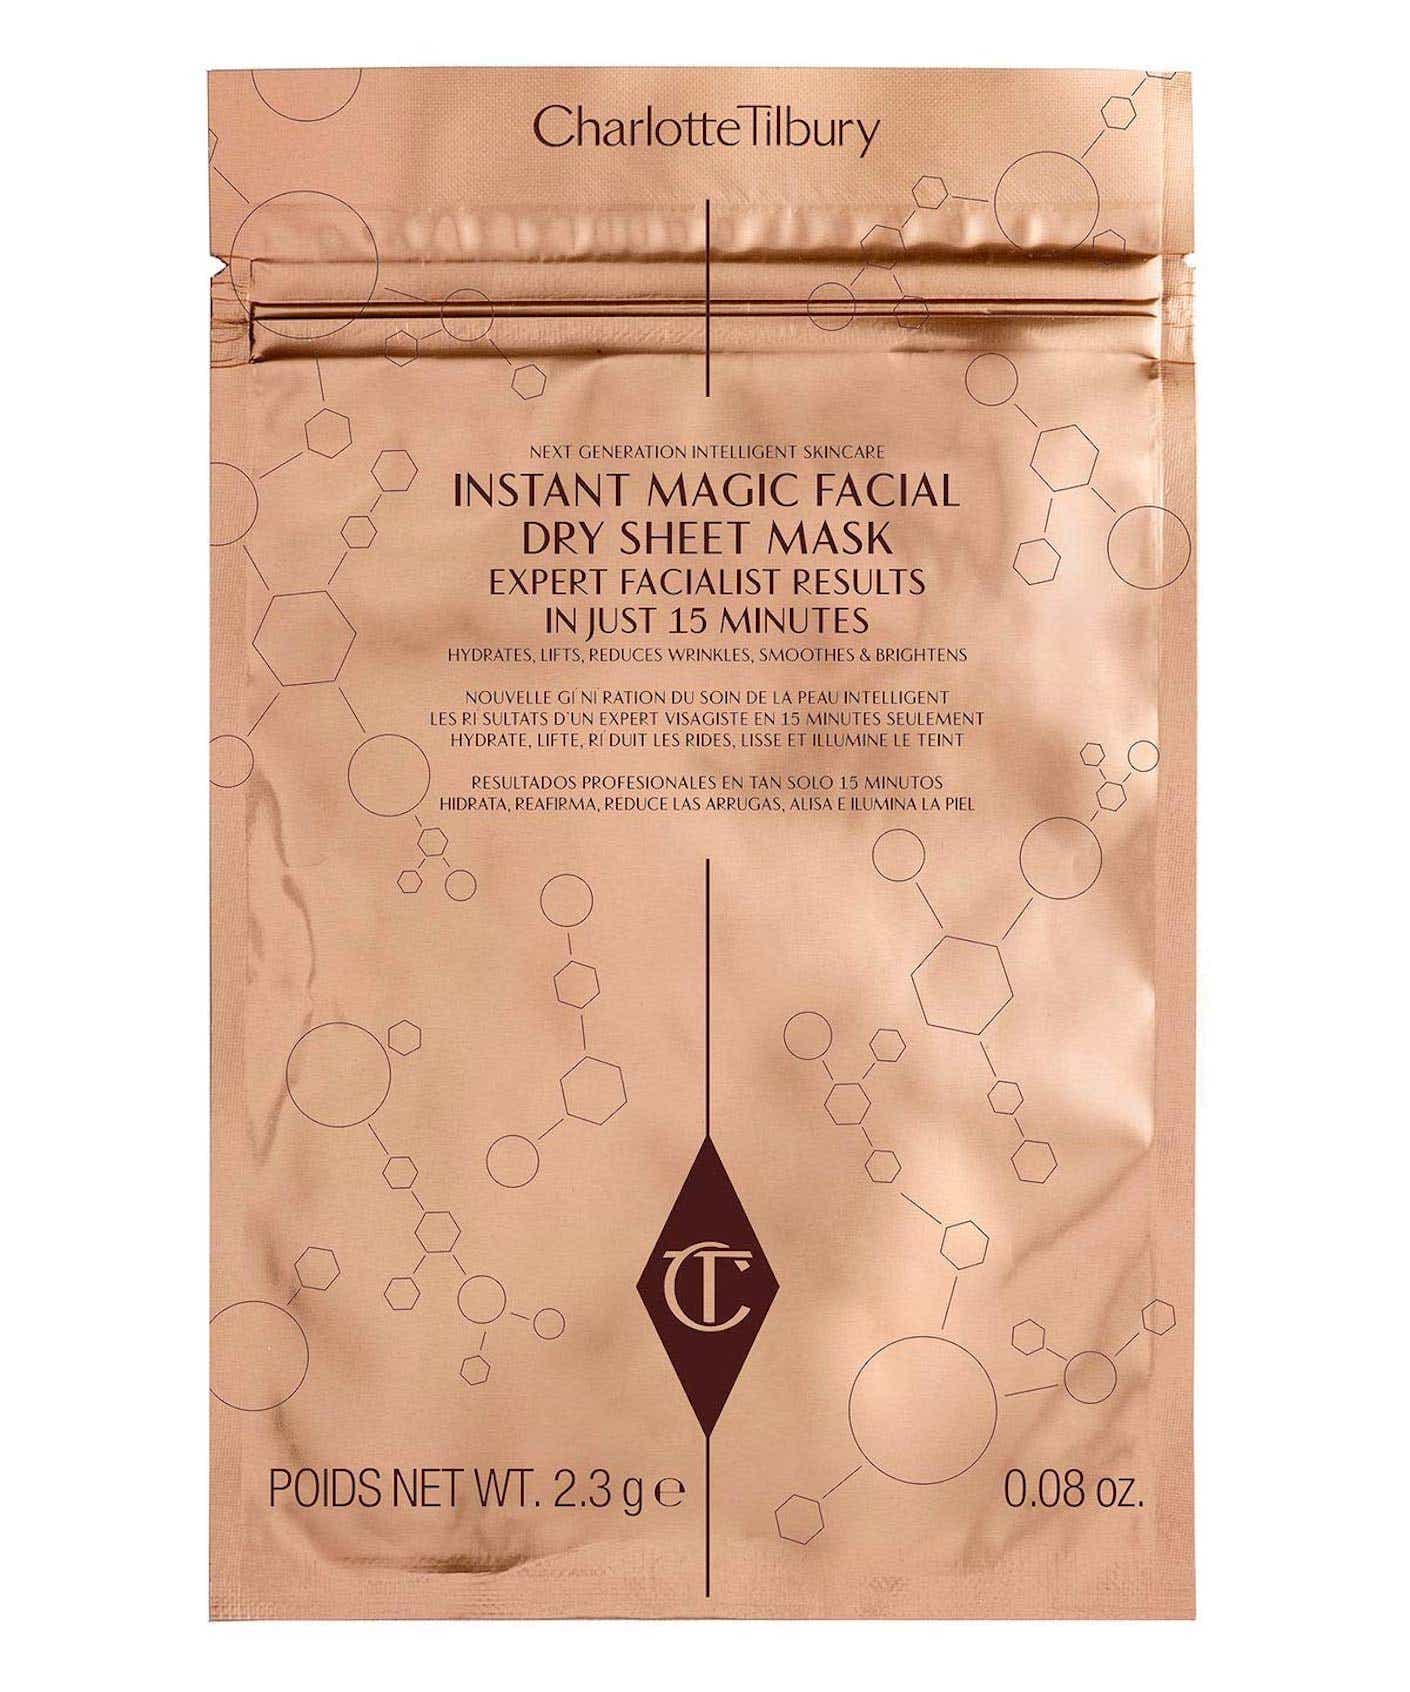 A bronze and plastic packaging of sheet masks is shown flat.